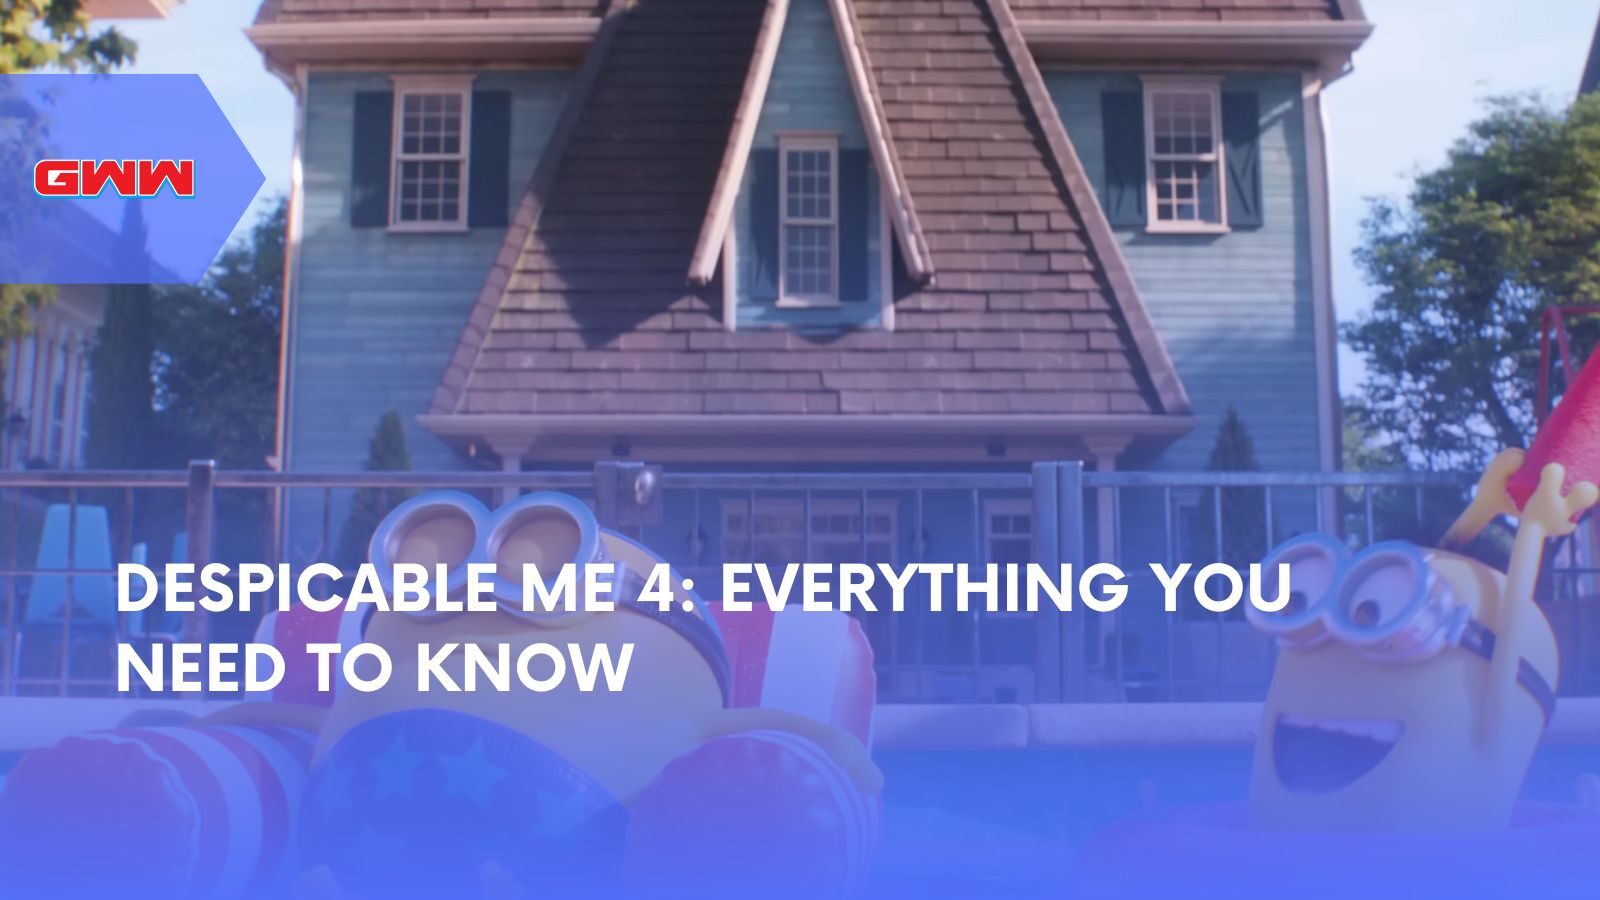 Despicable Me 4: Everything You Need to Know